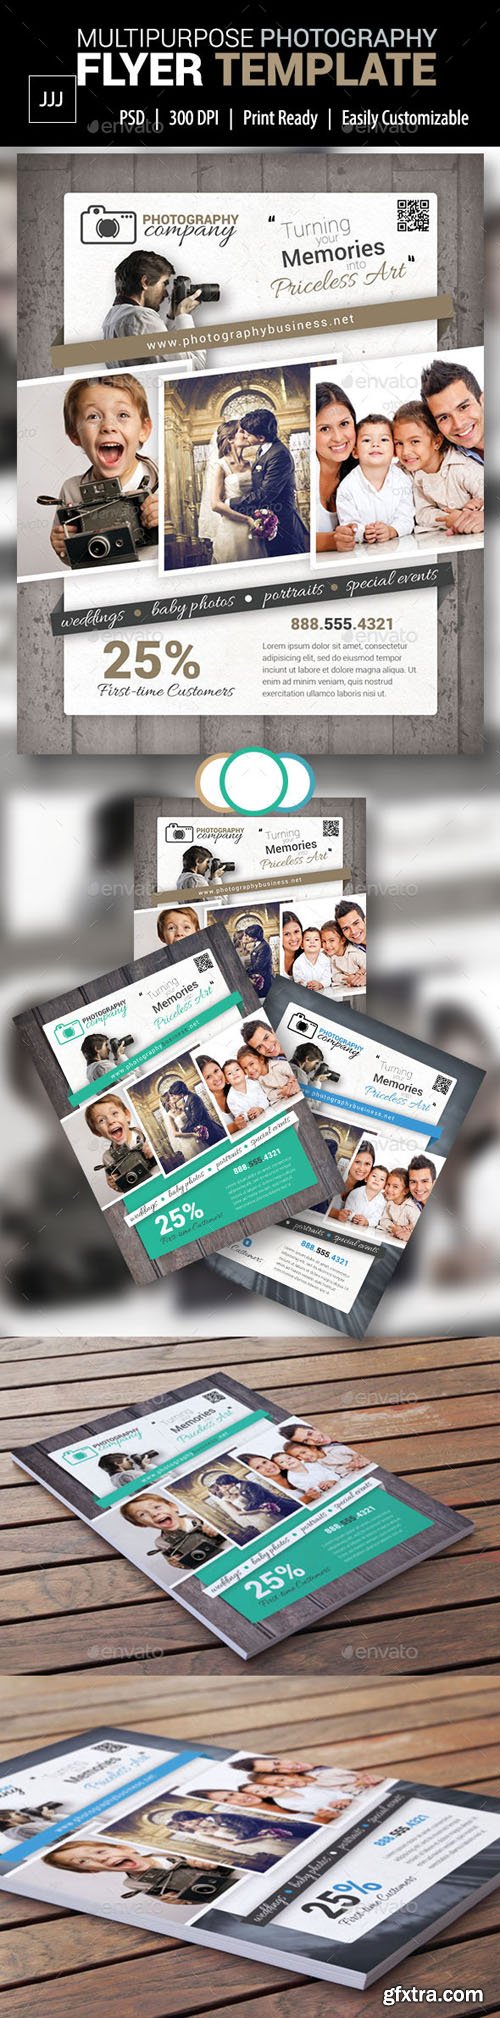 Photography Business Flyer 15 - Graphicriver 10586271